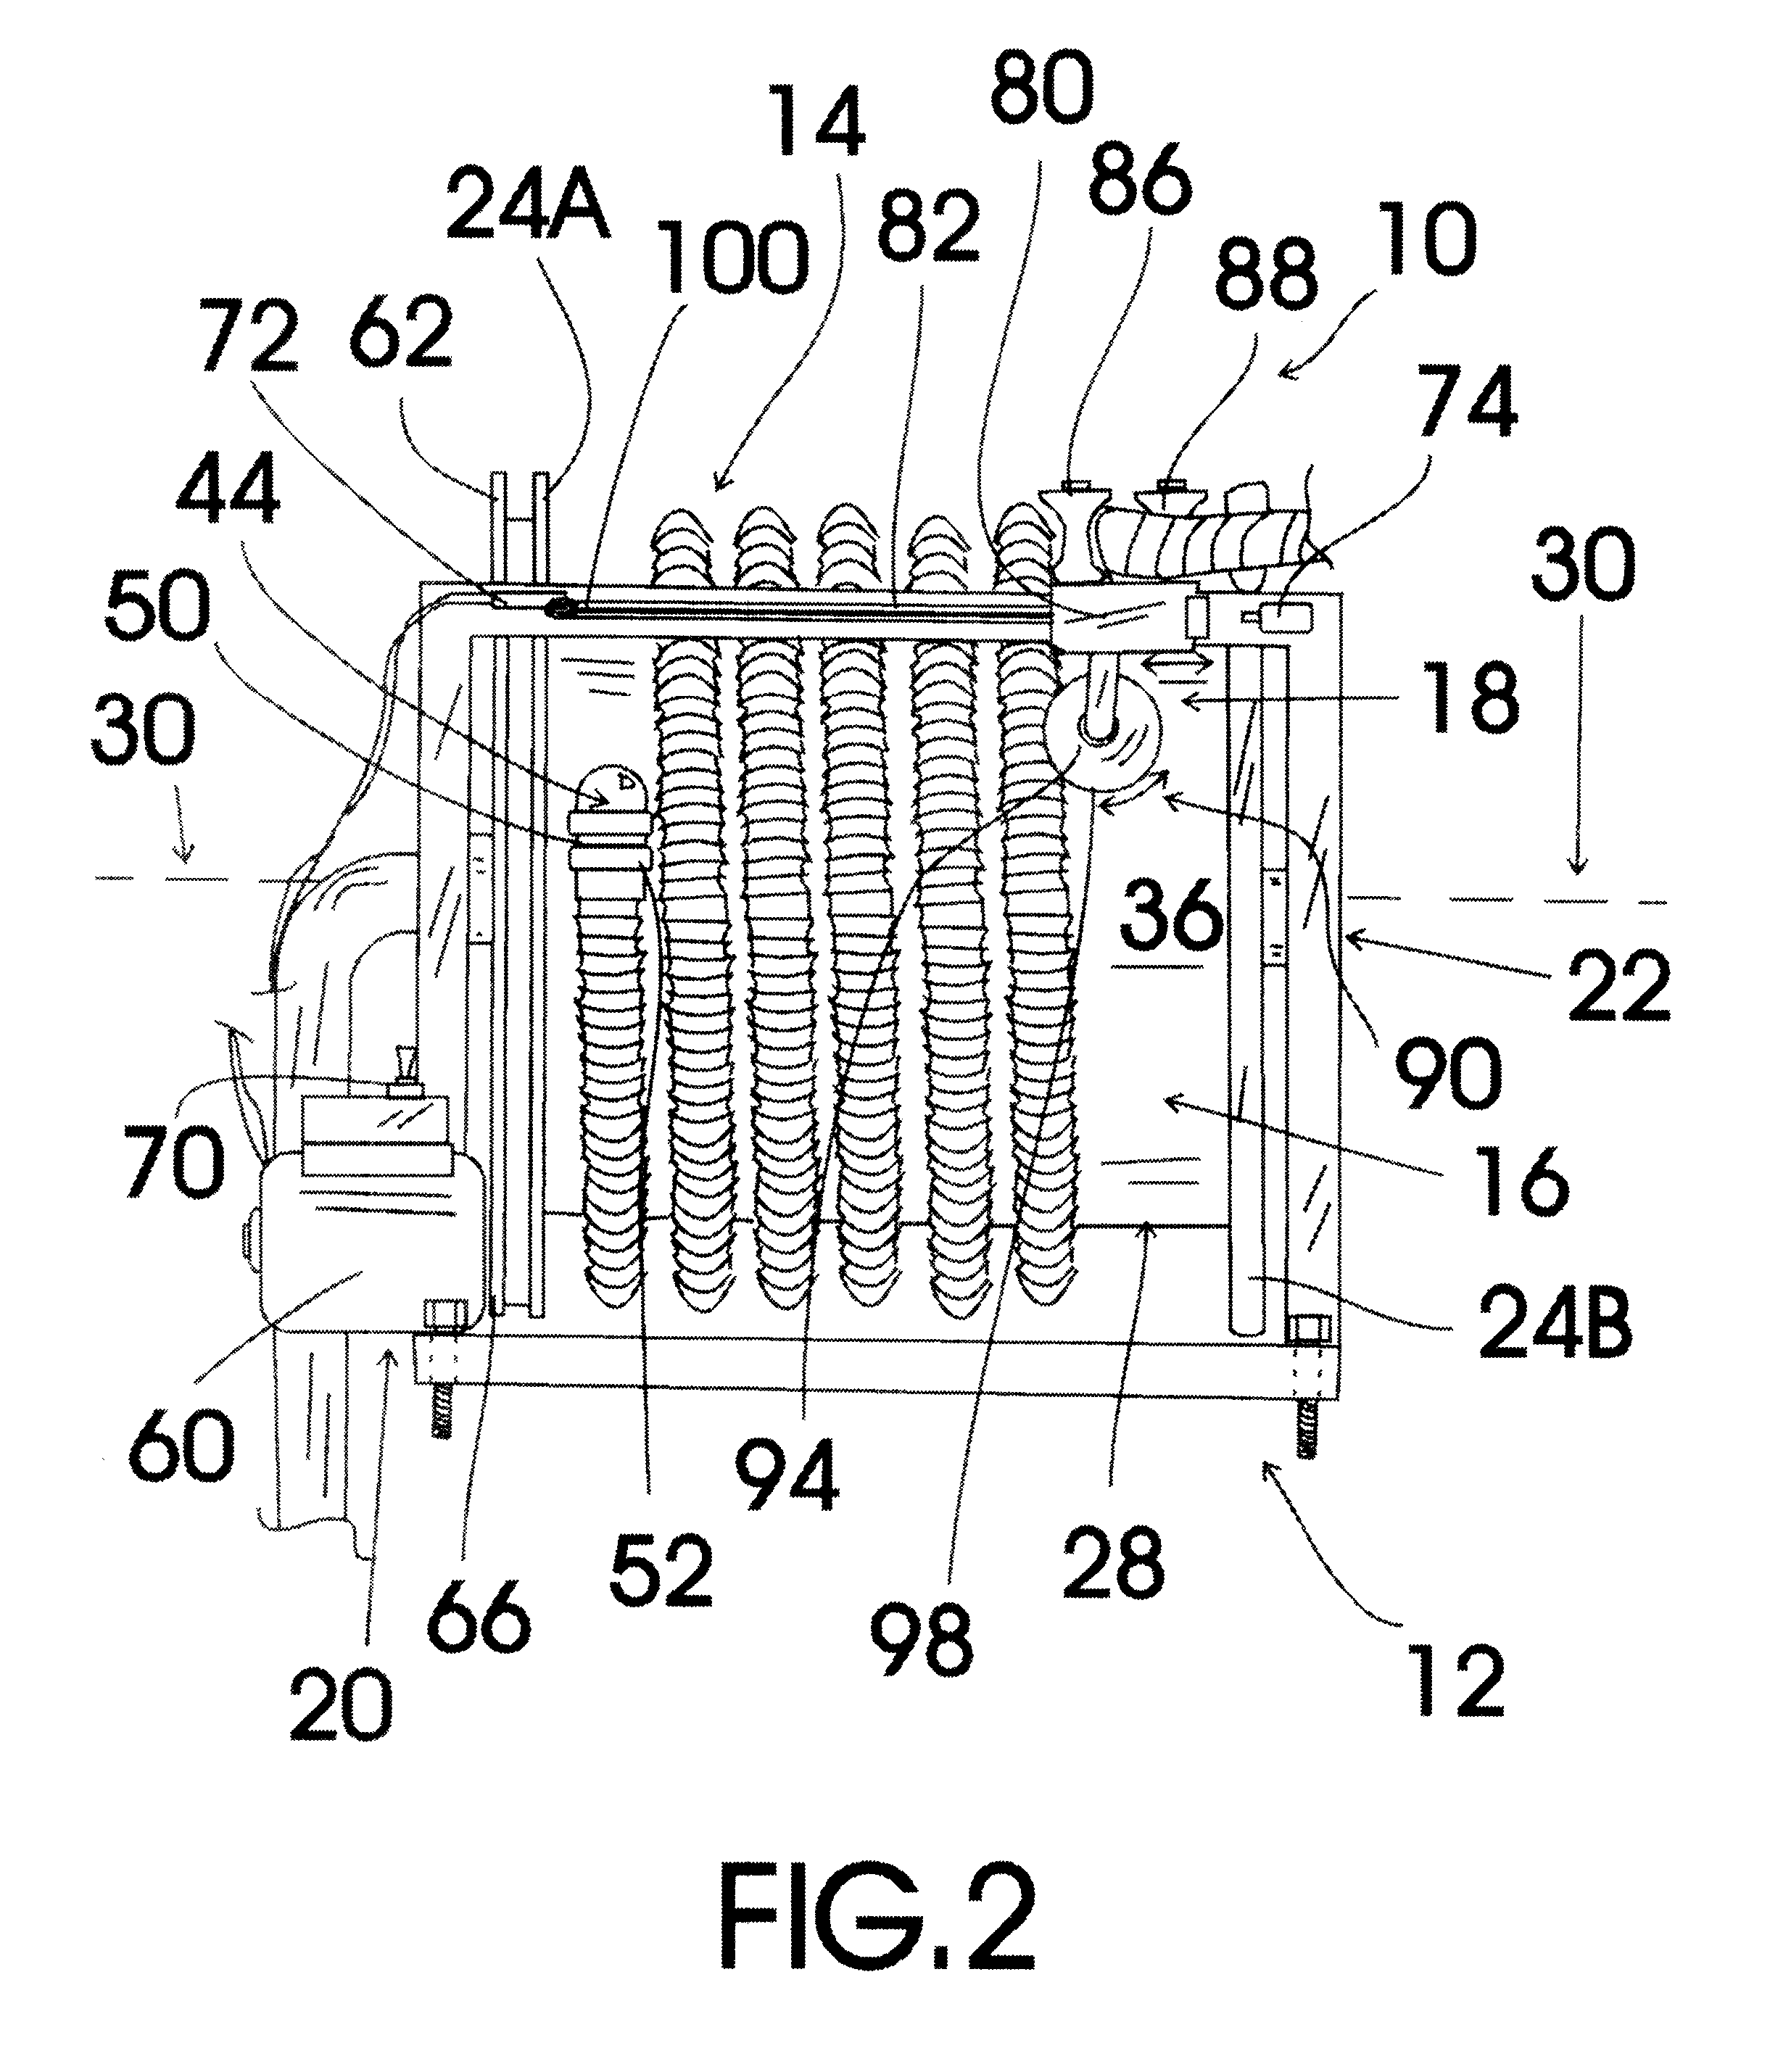 Vacuum hose assembly for a permanently installed building vacuum cleaner system